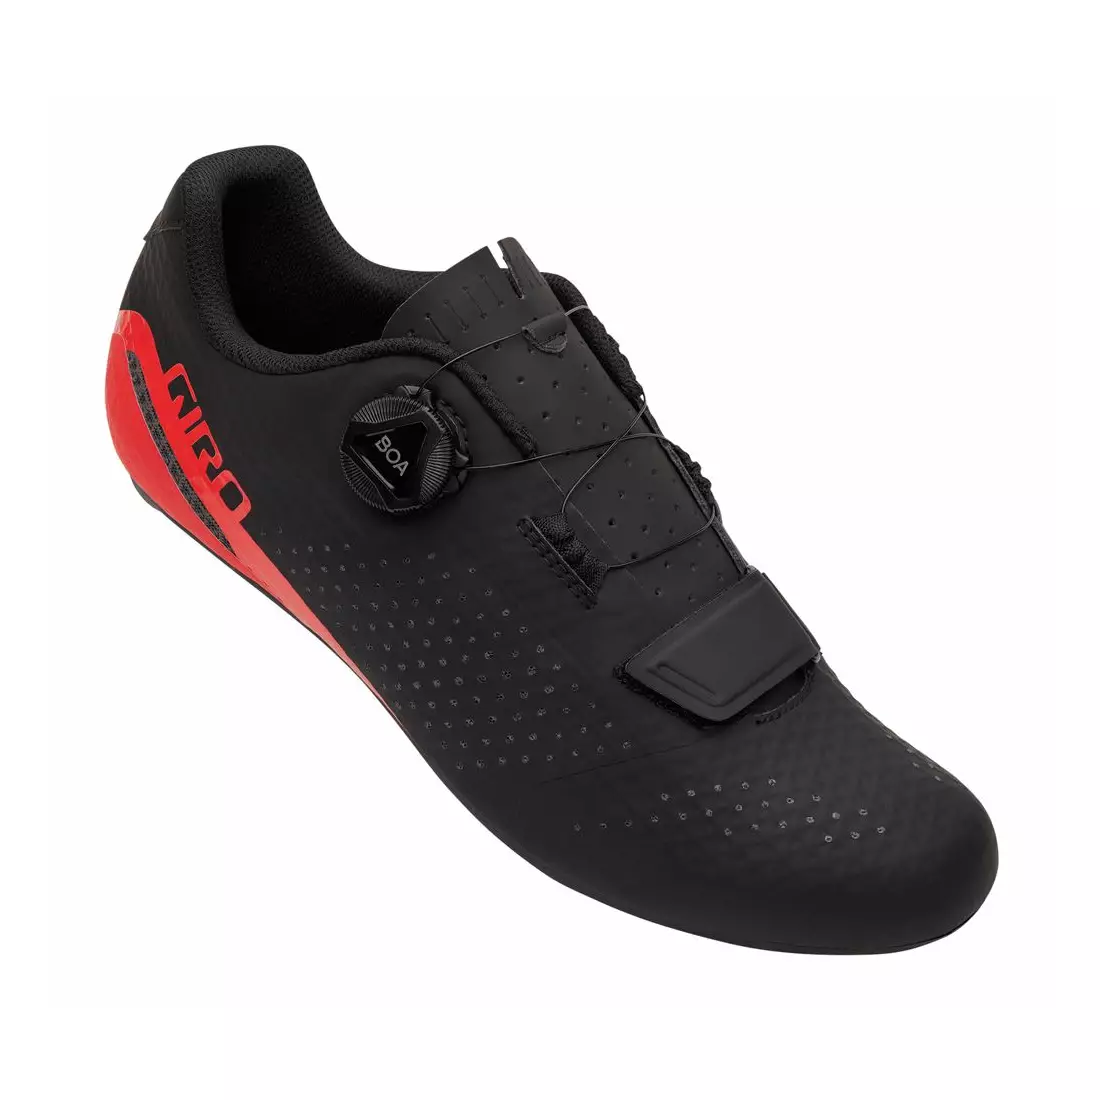 GIRO men's bicycle shoes CADET black bright red GR-7126122